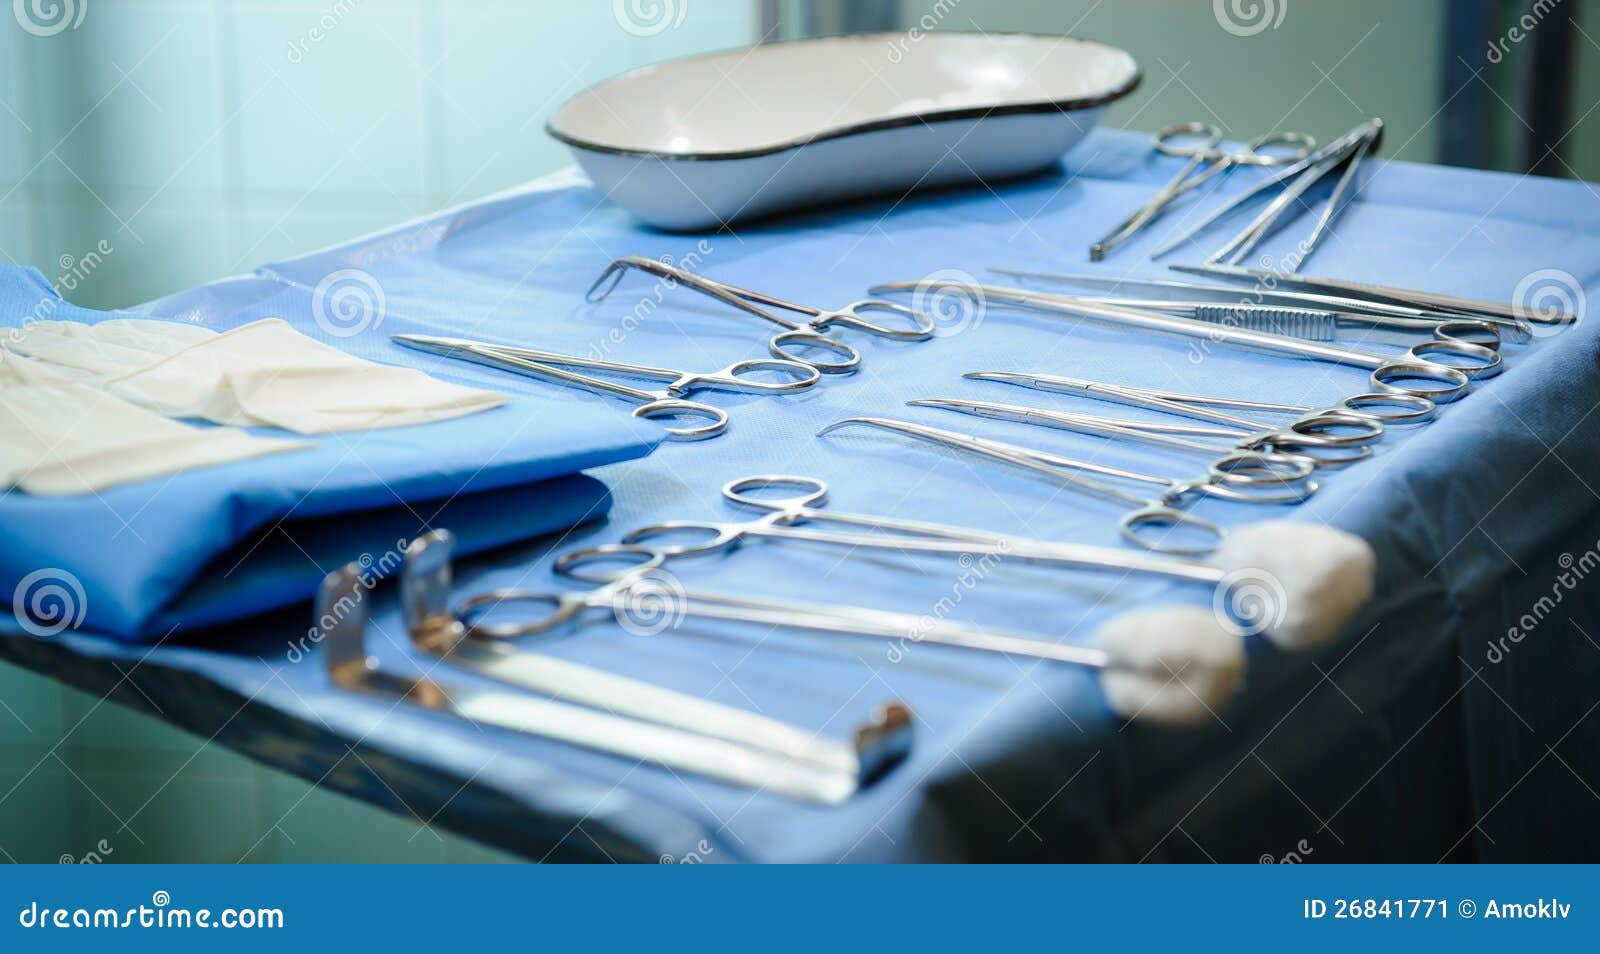 surgical tools kit